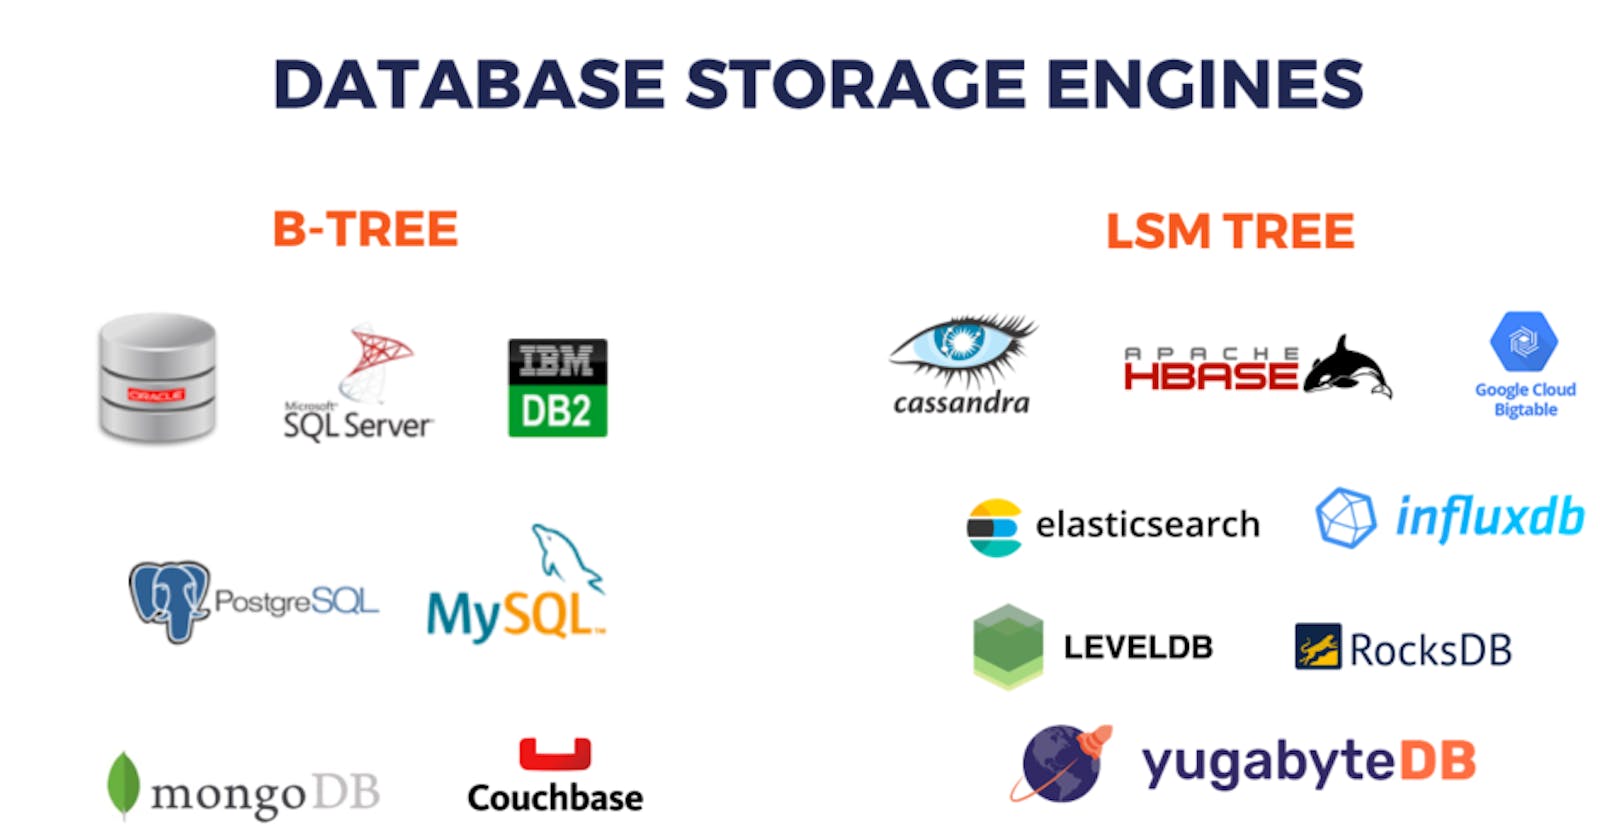 Data Storage and Retrieval: Log-Structured and Page-Oriented Storage Engines